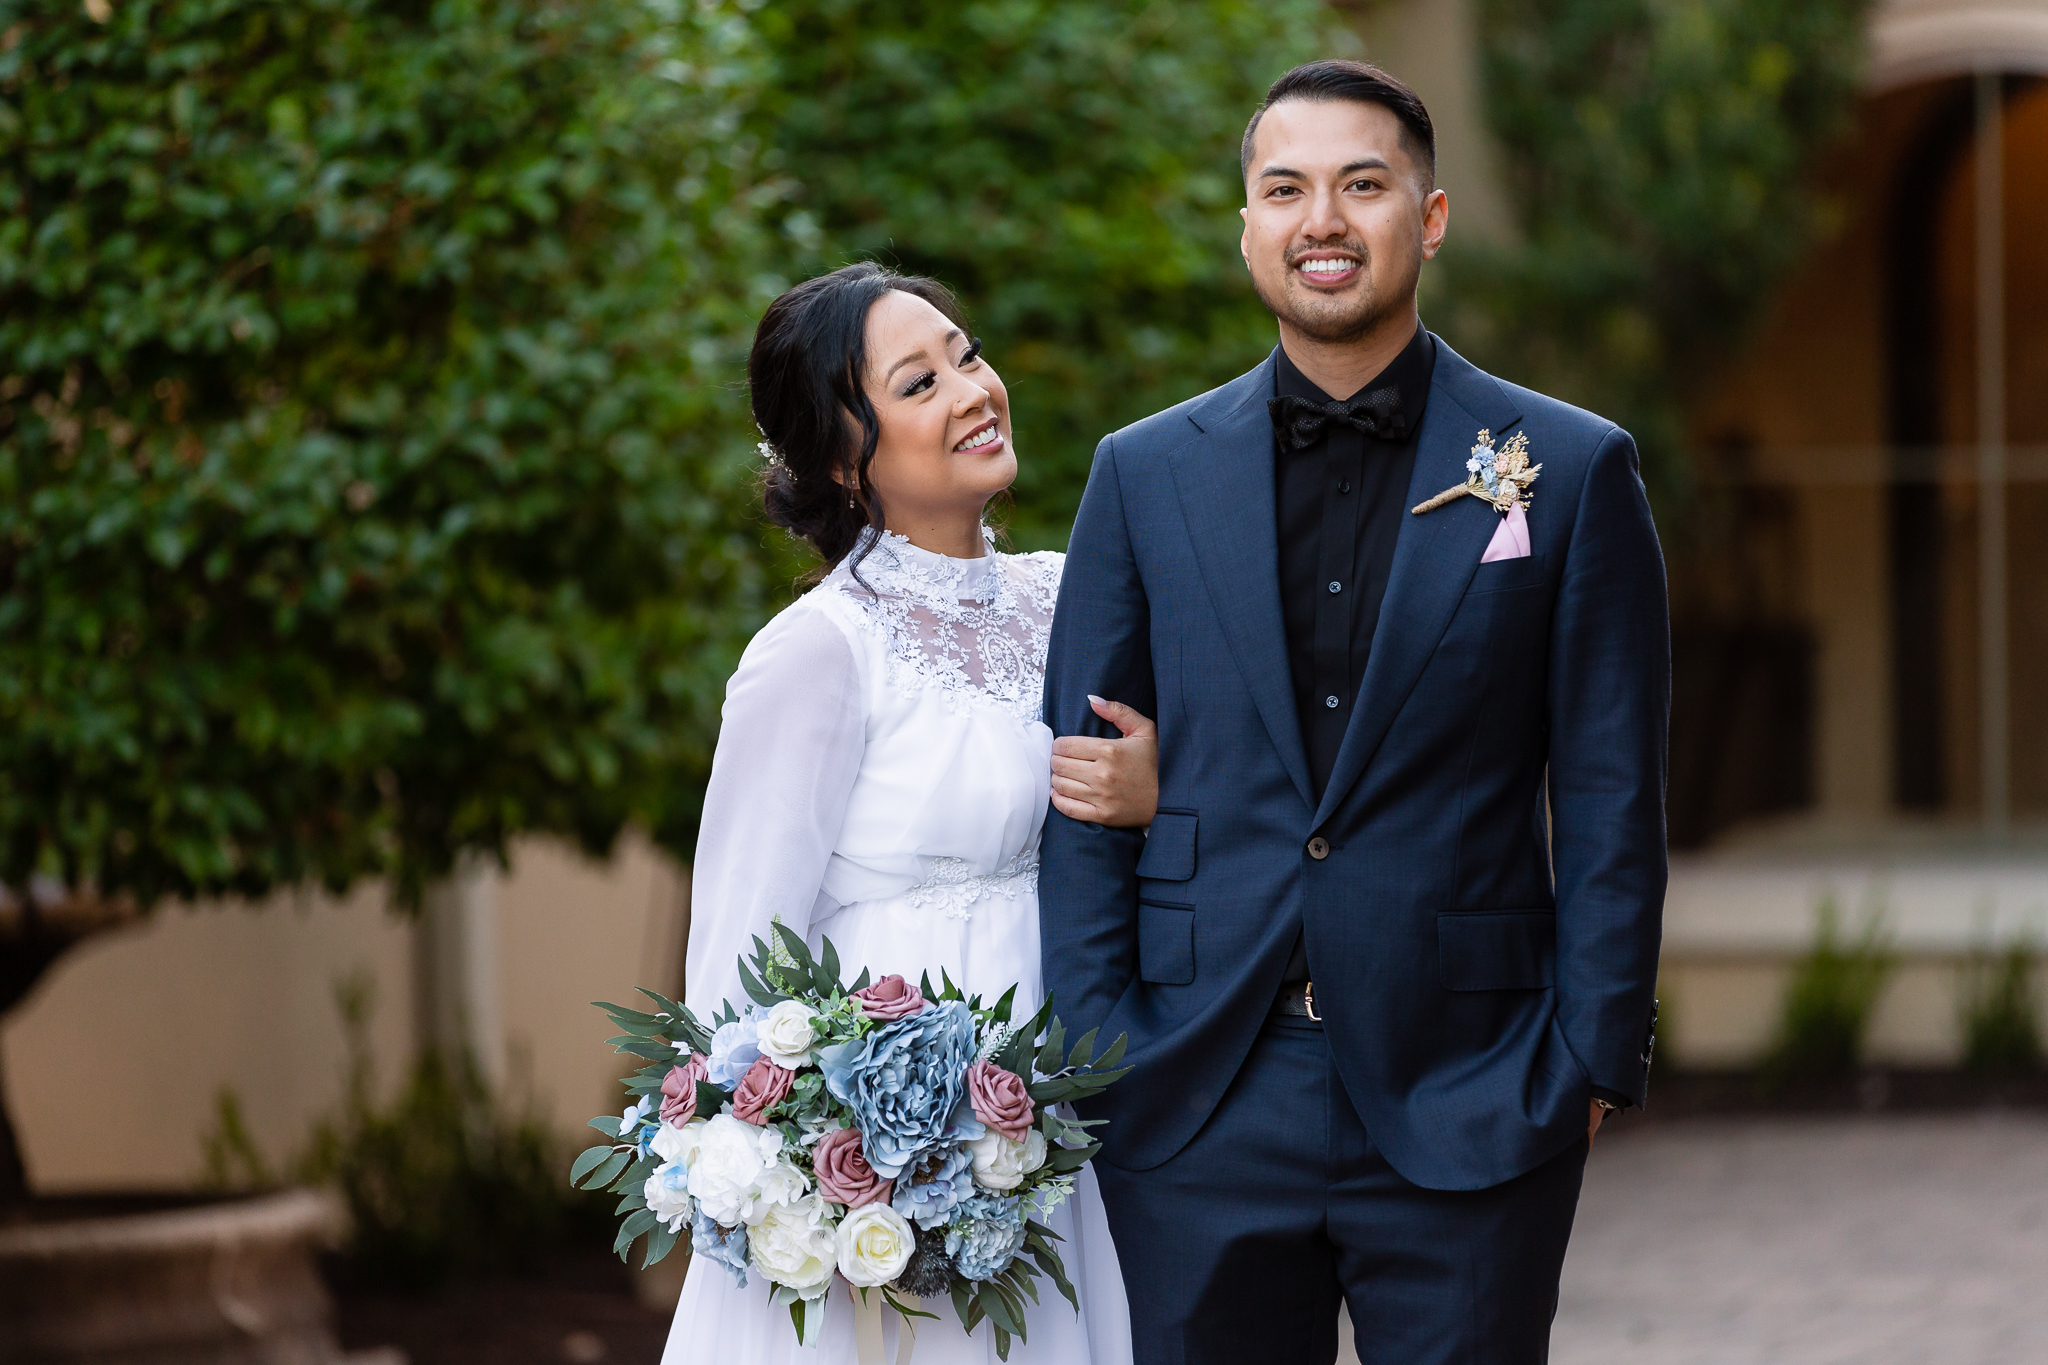 Dallas wedding photographer captures bride holding her grooms arm and smiling up at him while he holds his hands in his pockets for their outdoor wedding portraits